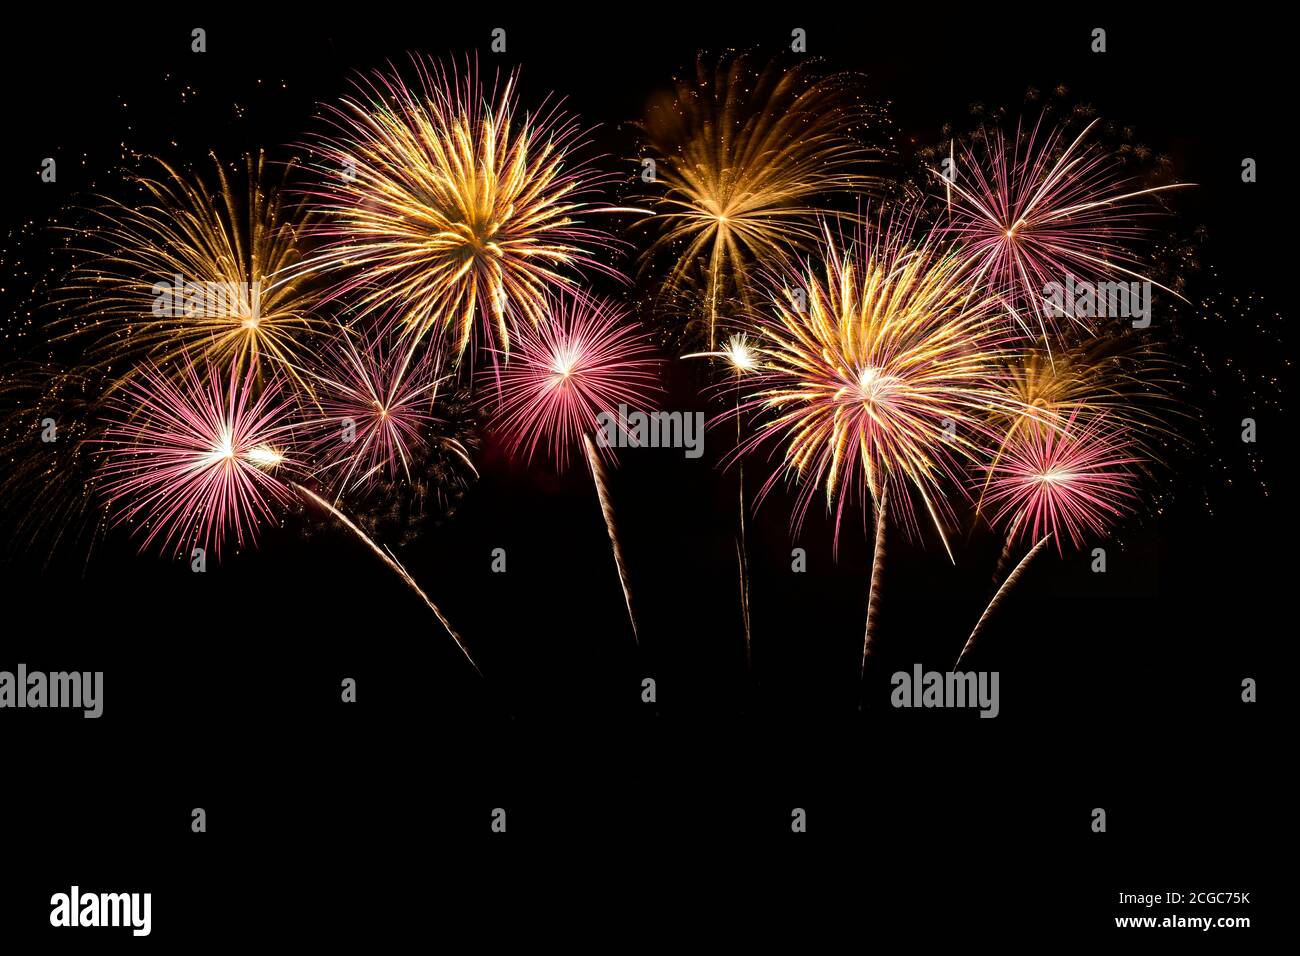 Colorful fireworks celebration and the midnight sky background. Stock Photo